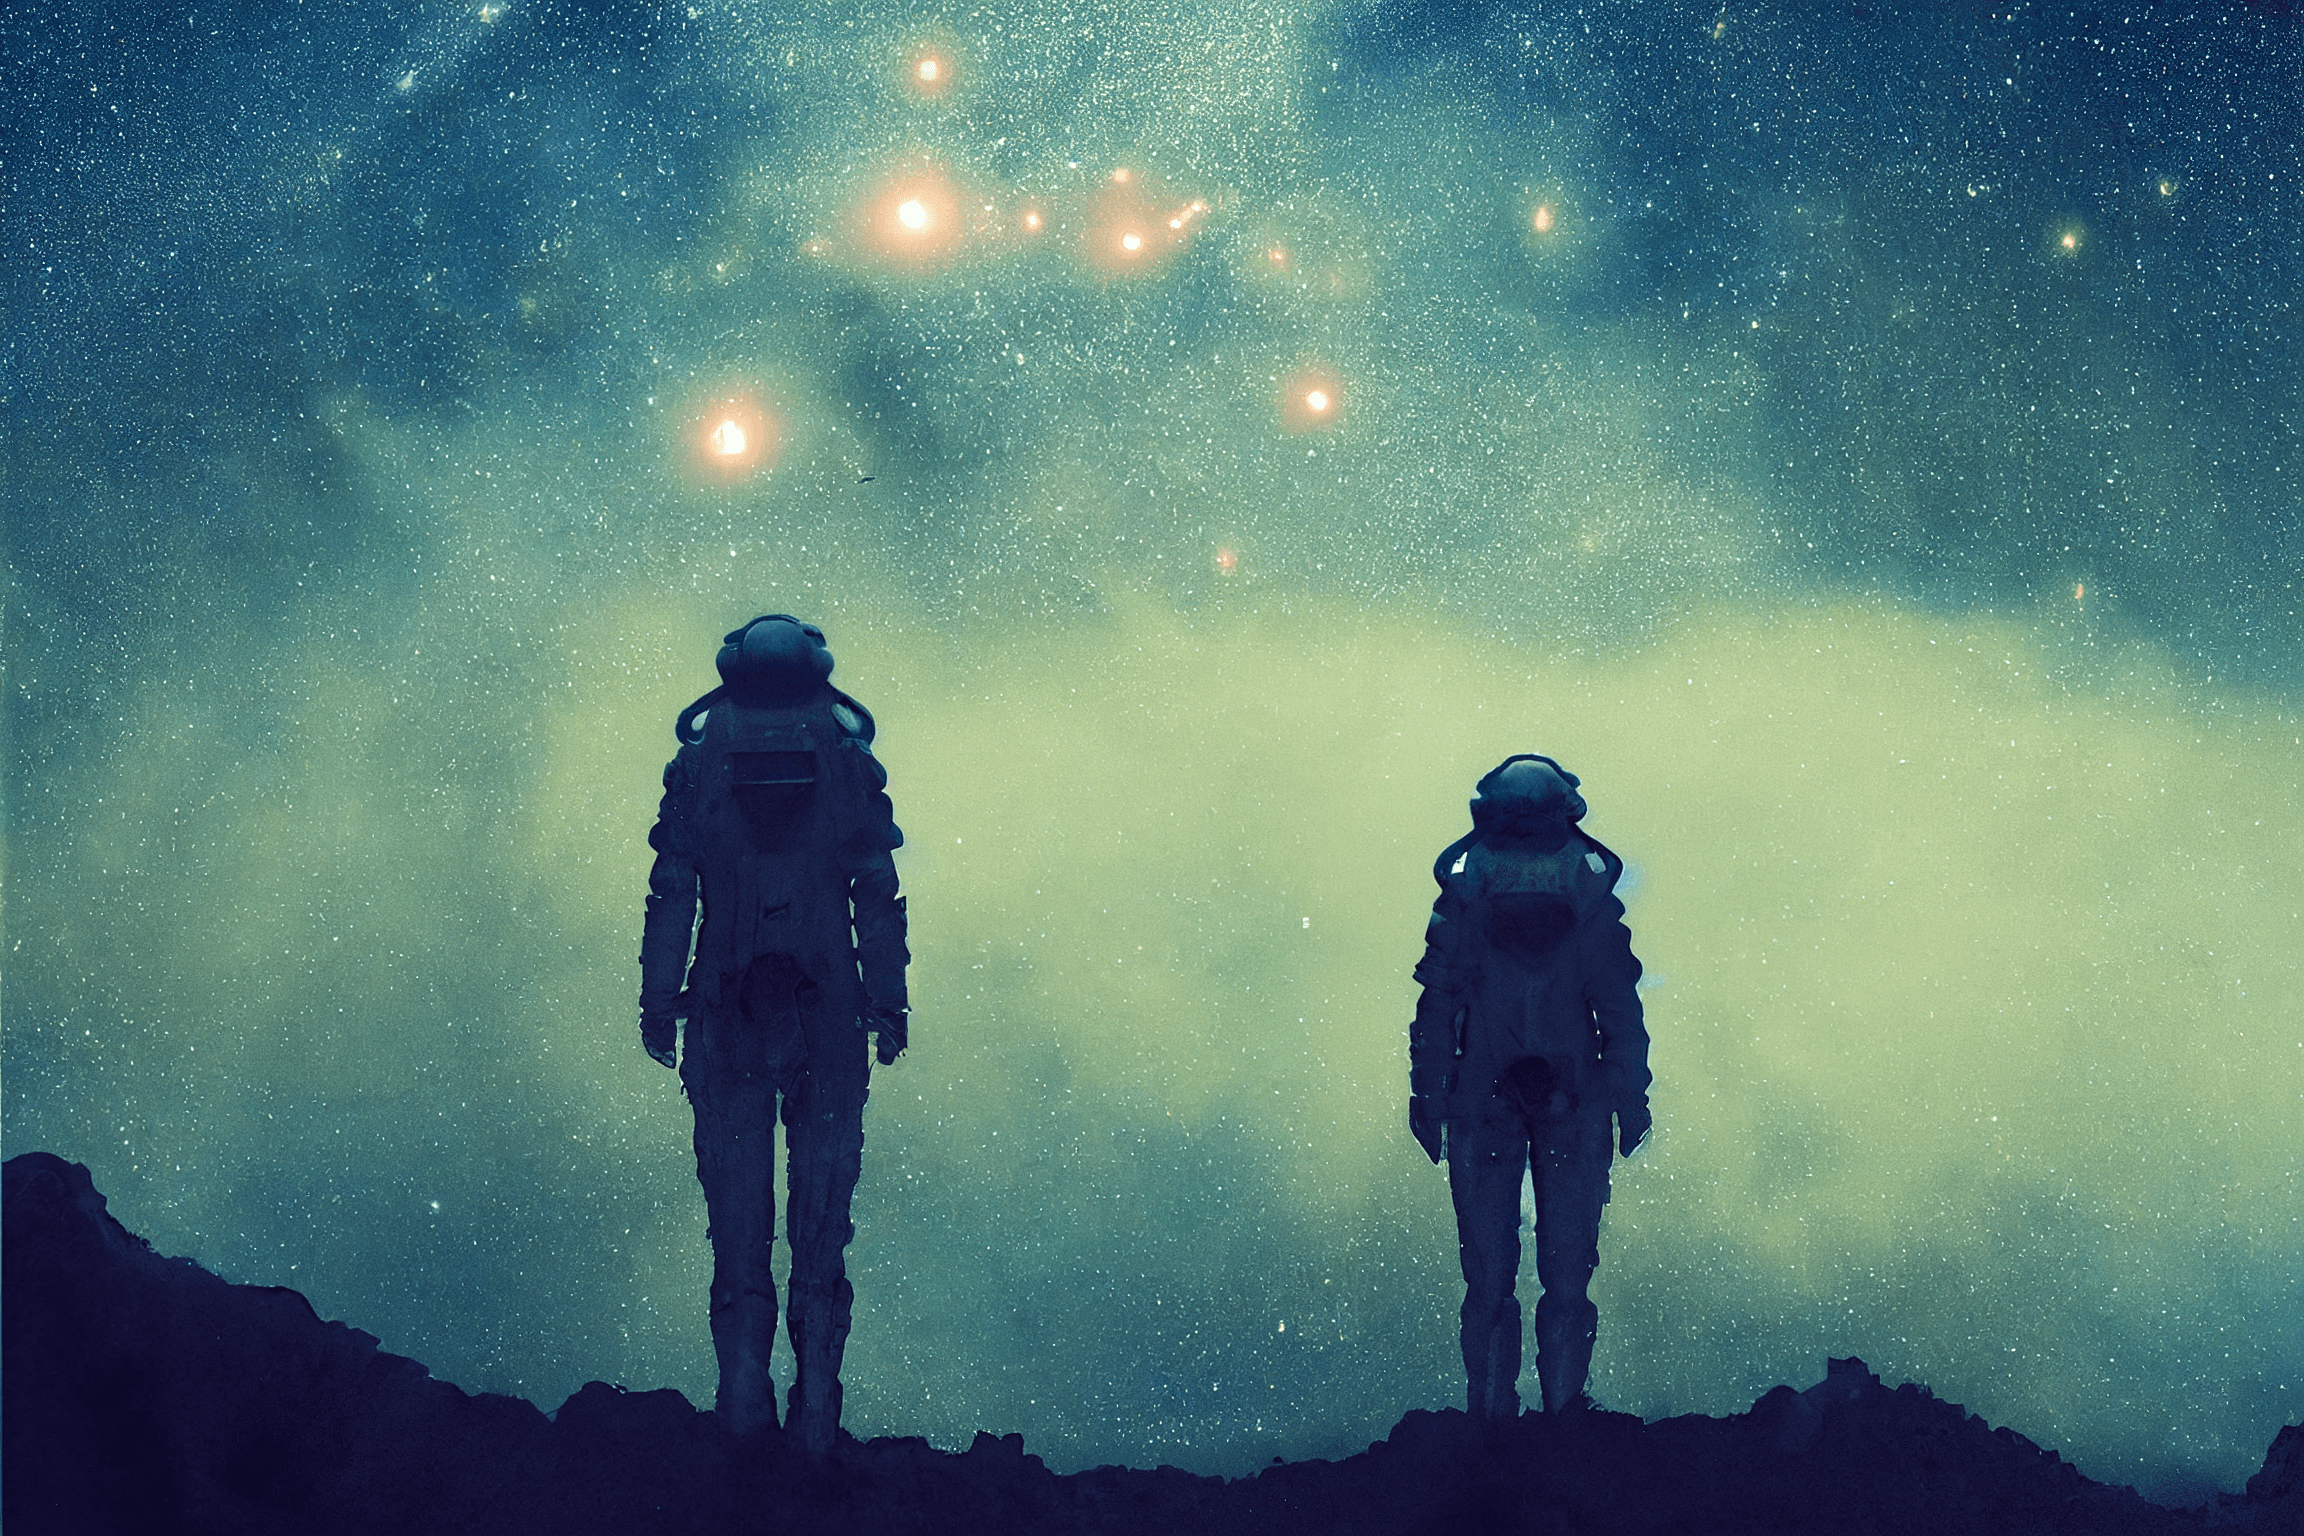 Dying somewhere we were stars – astronauts